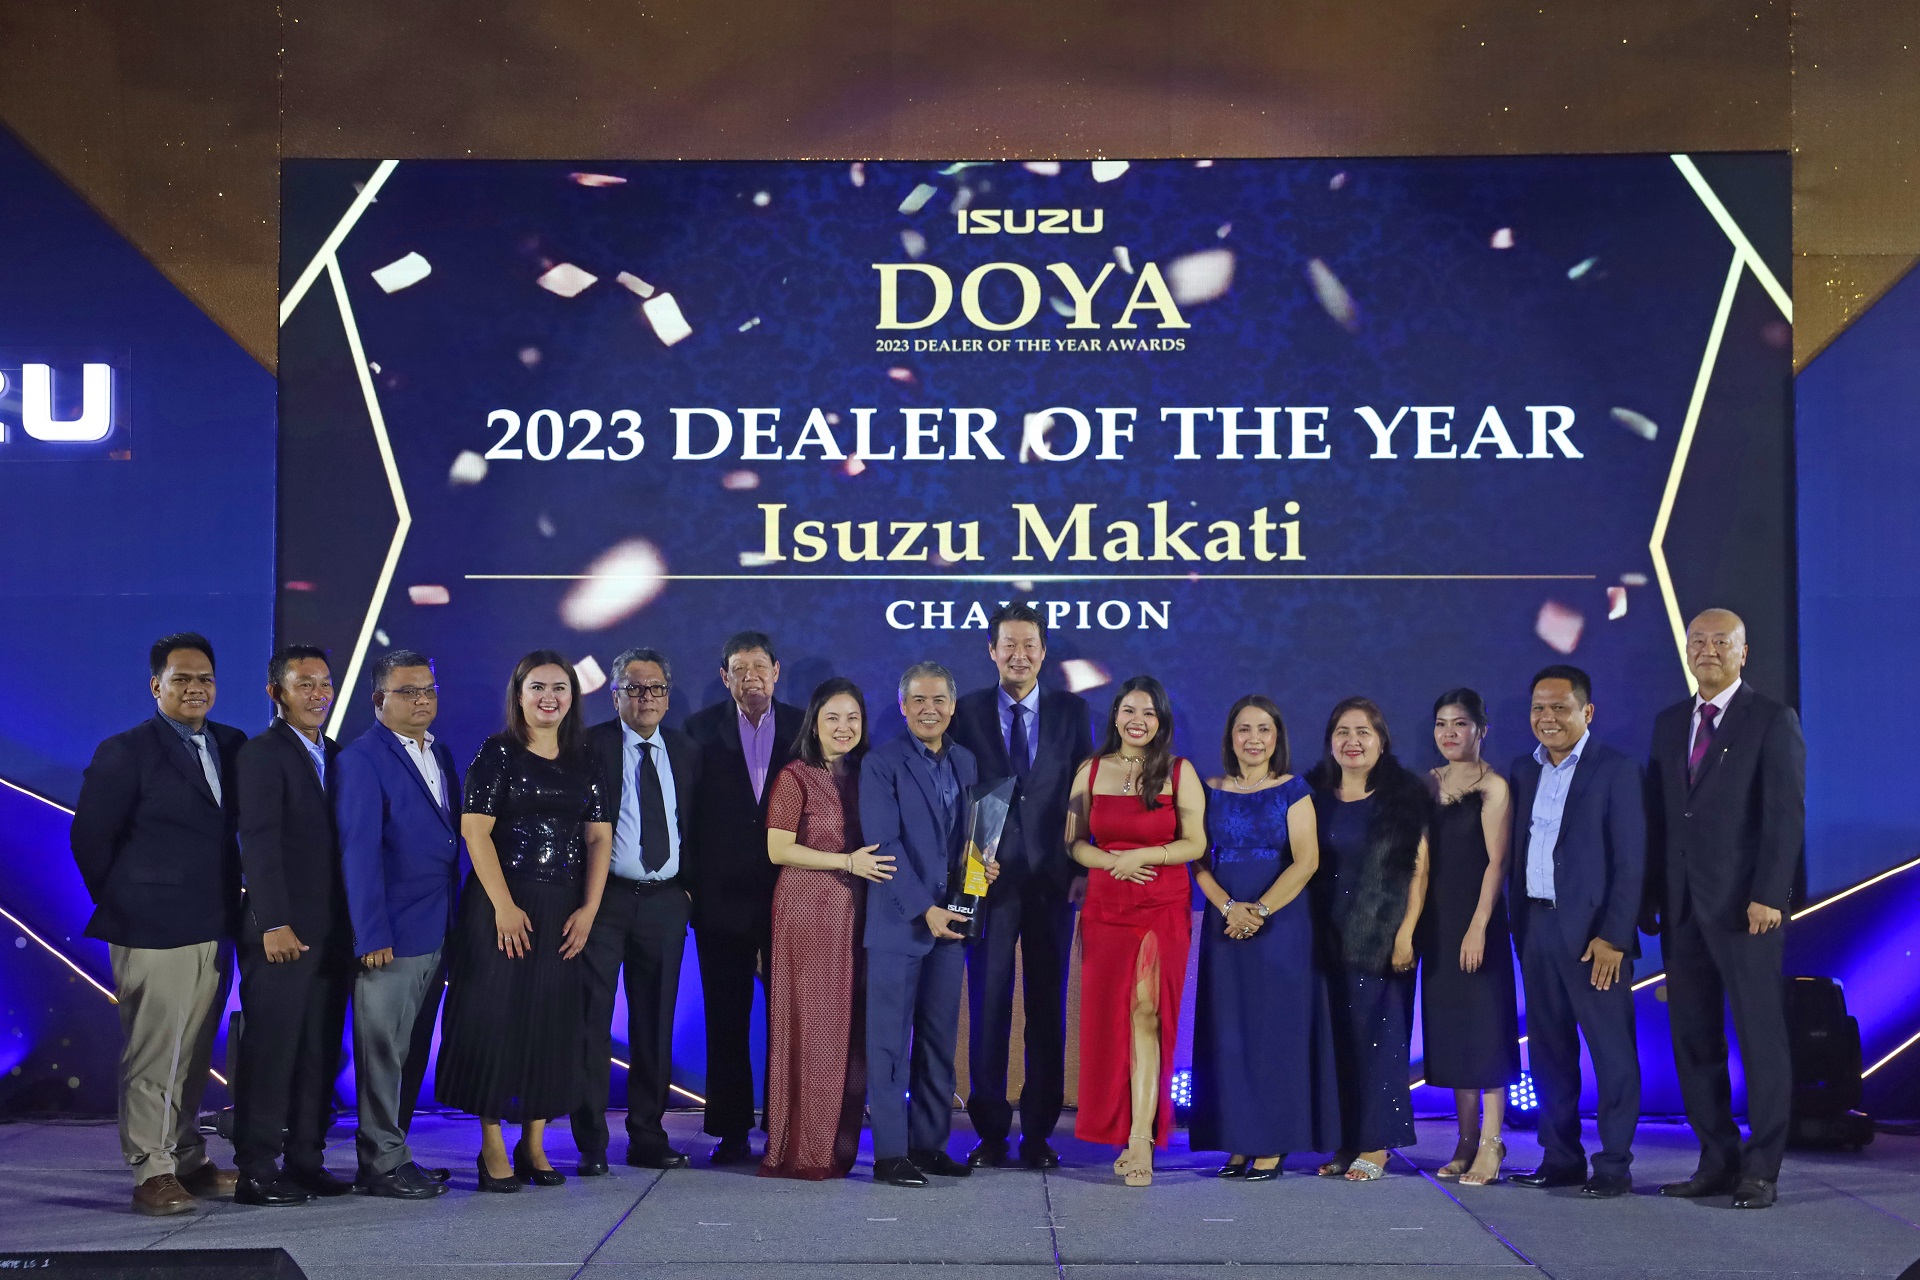 Isuzu Makati achieves back-to-back victory at annual Dealer of the Year Awards image